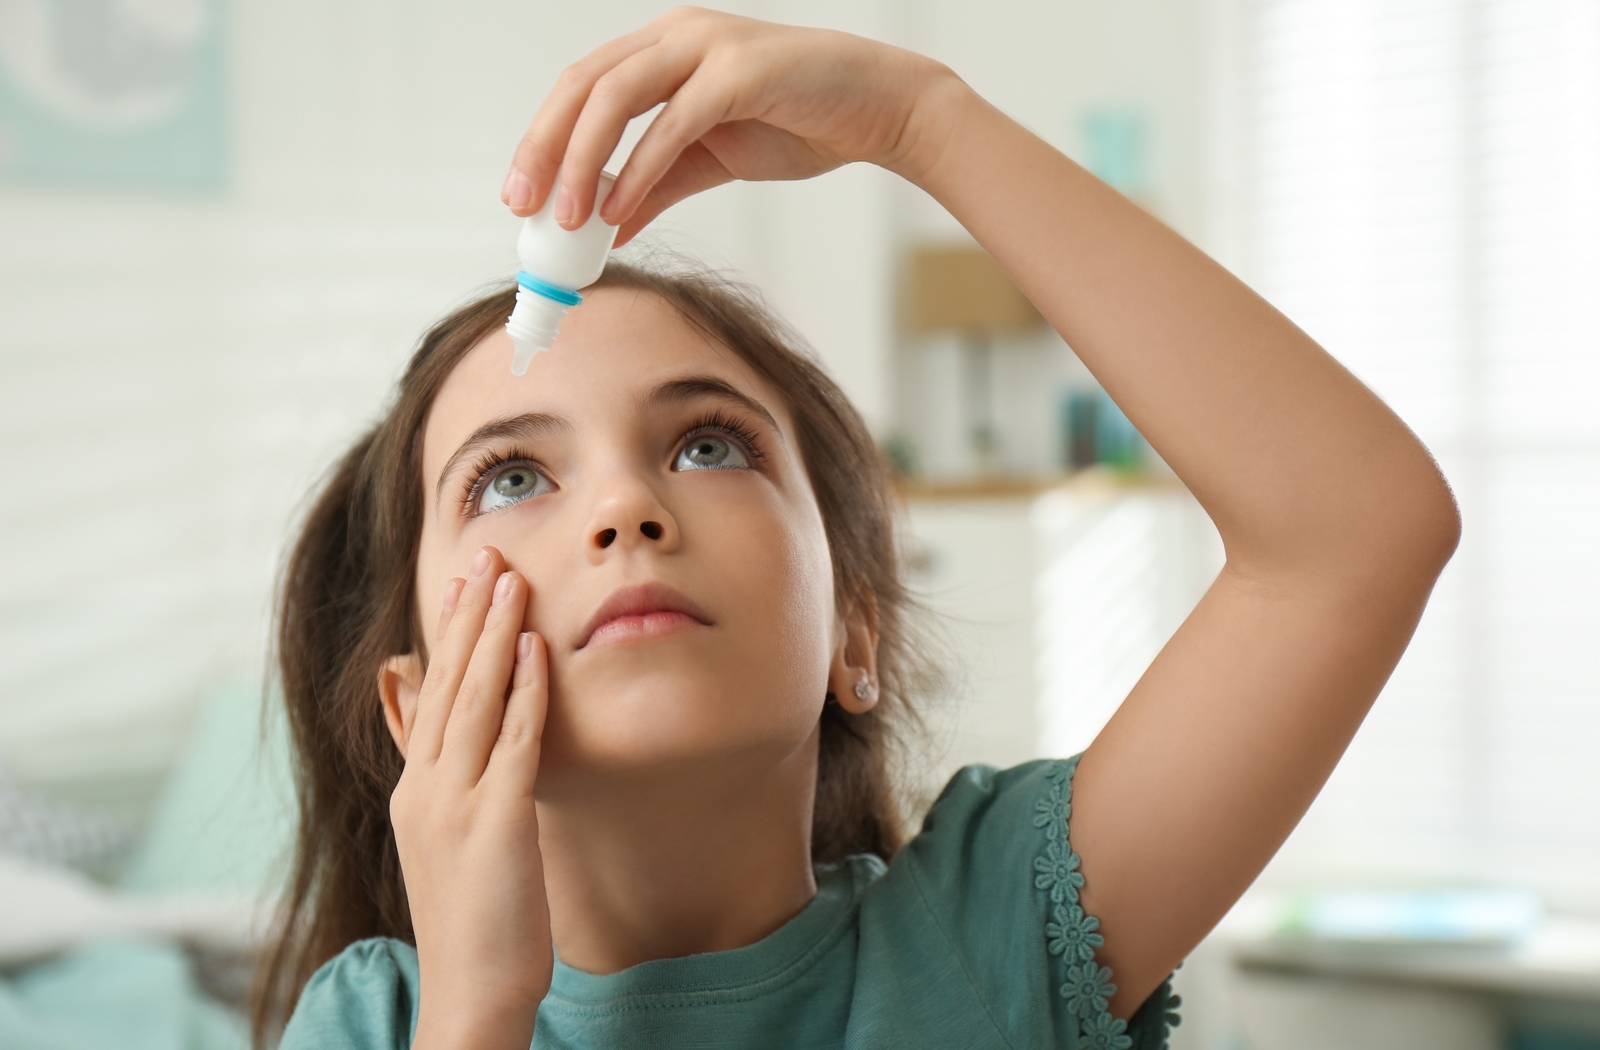 Are Visine Eye Drops Bad for Your Eyes?